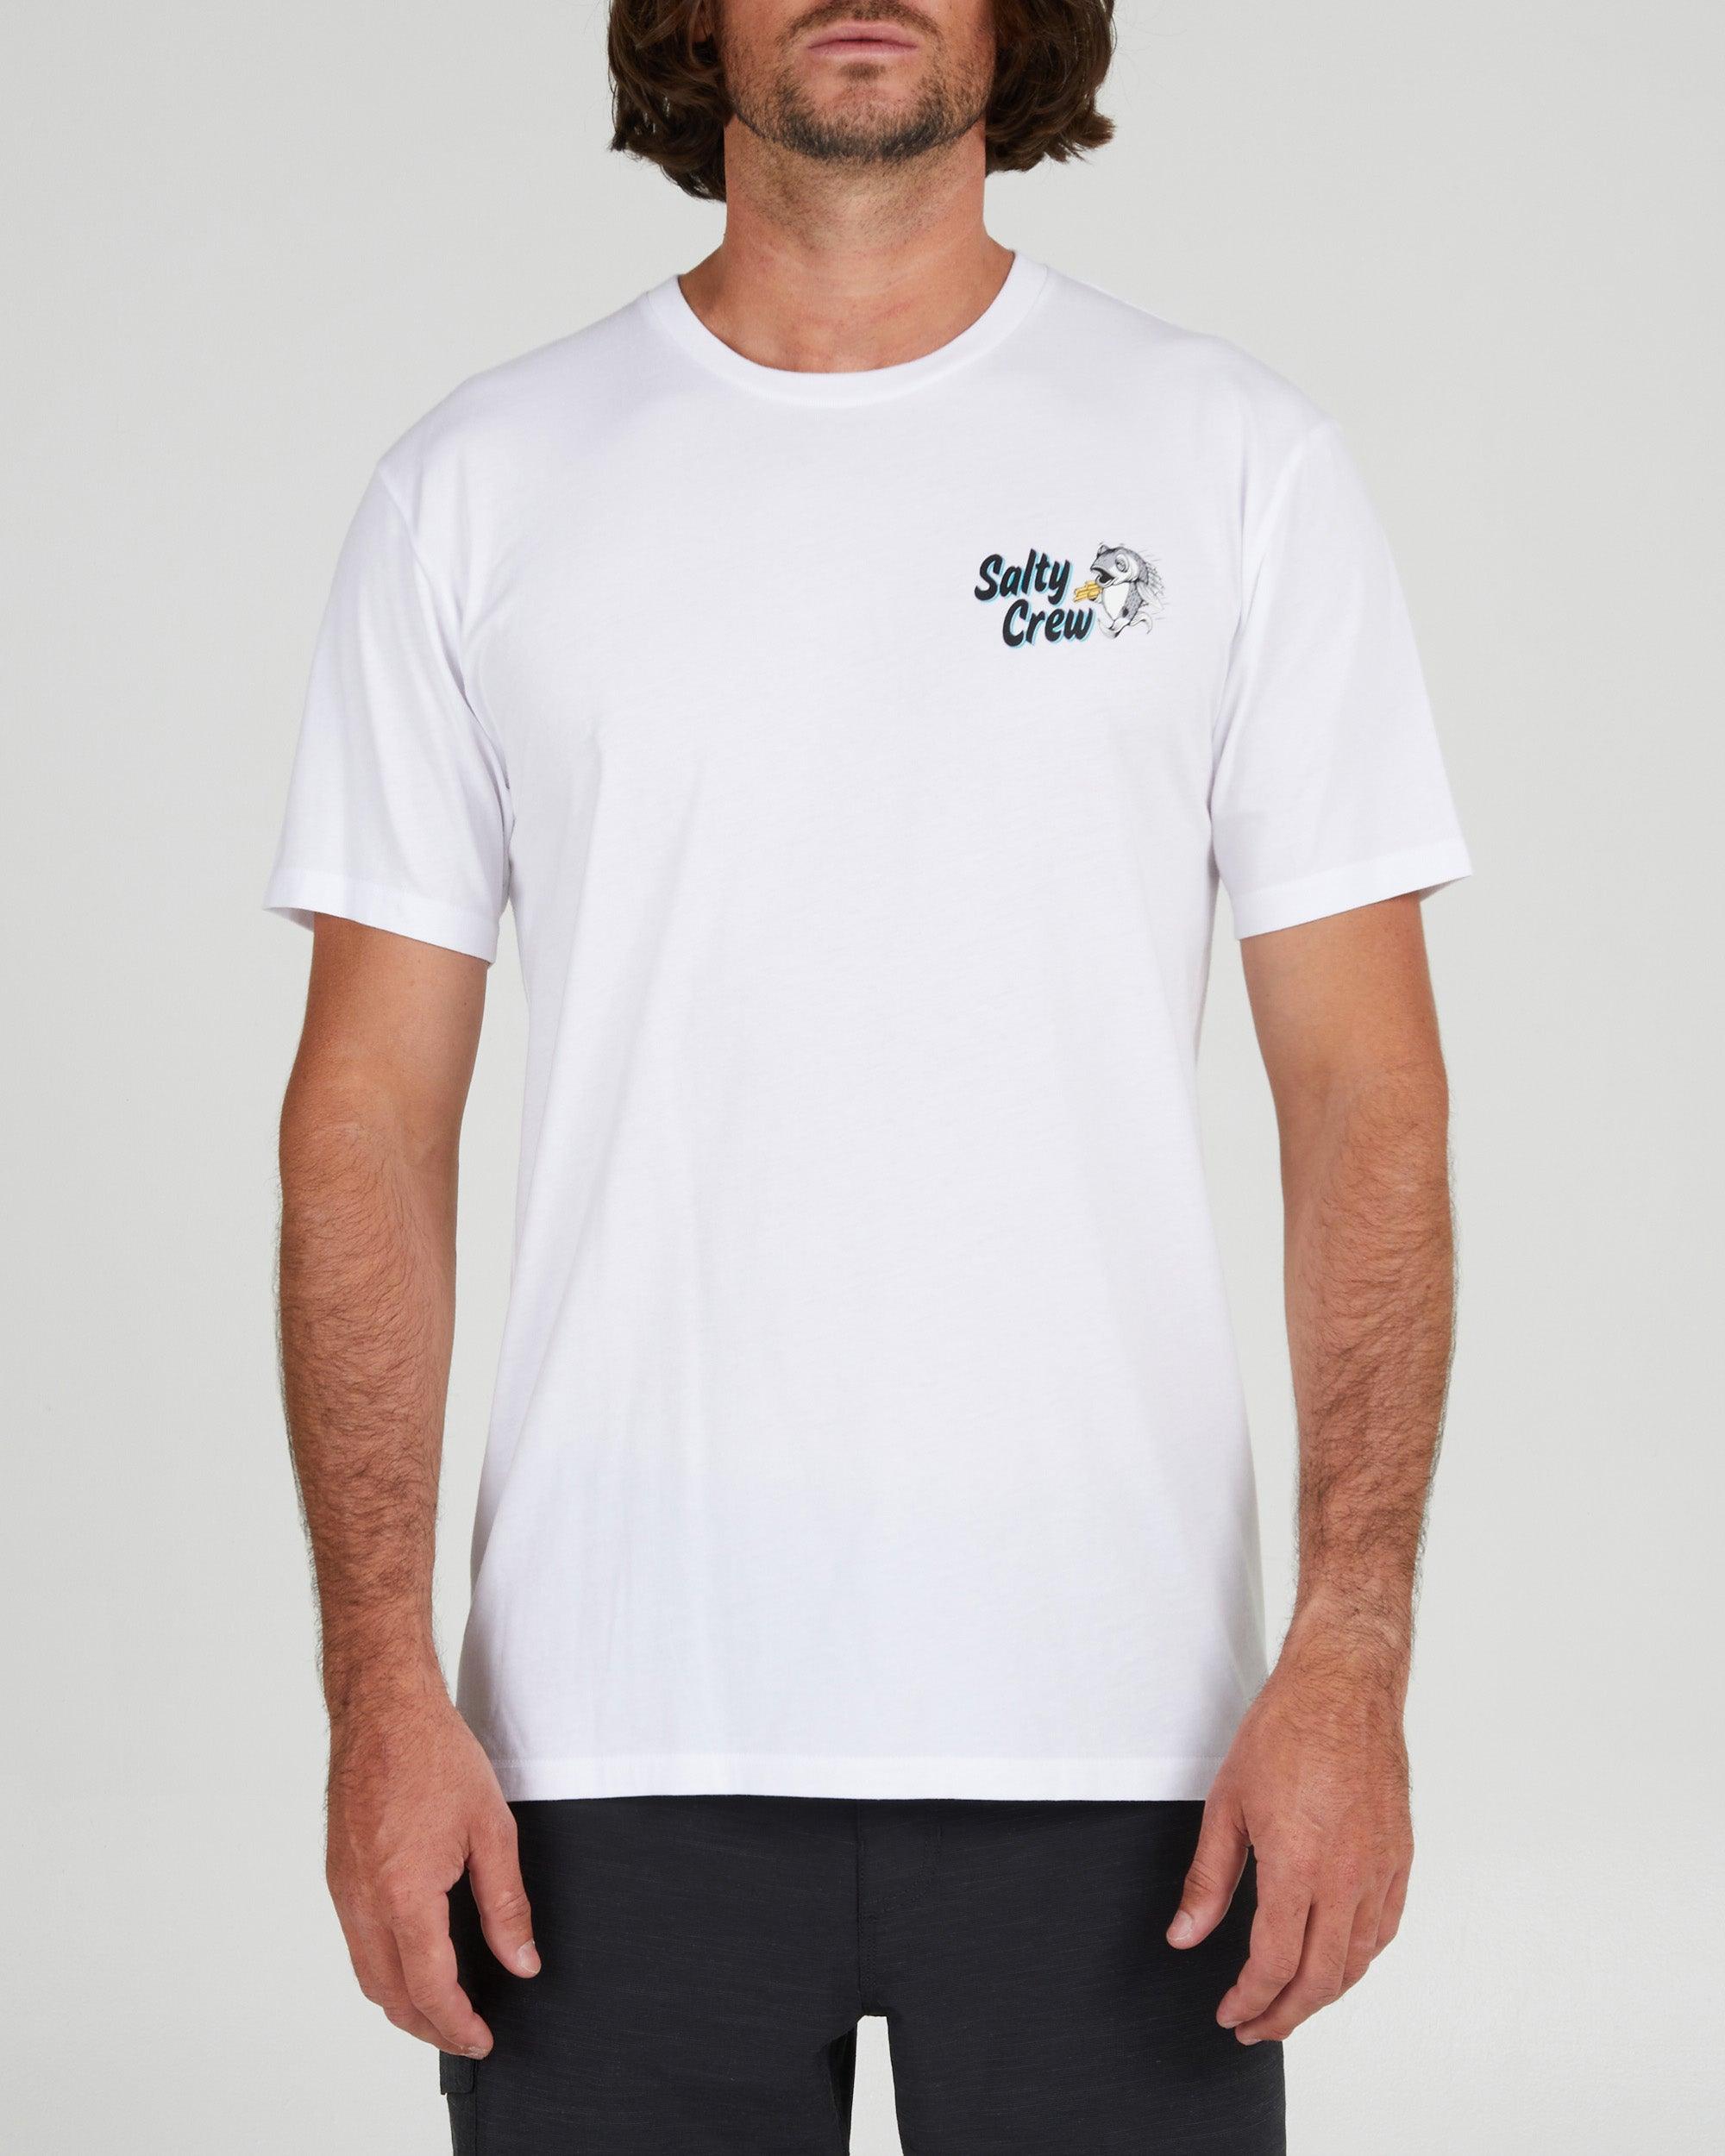 Fish & Chips S/S Premium Tee - White - Purpose-Built / Home of the Trades